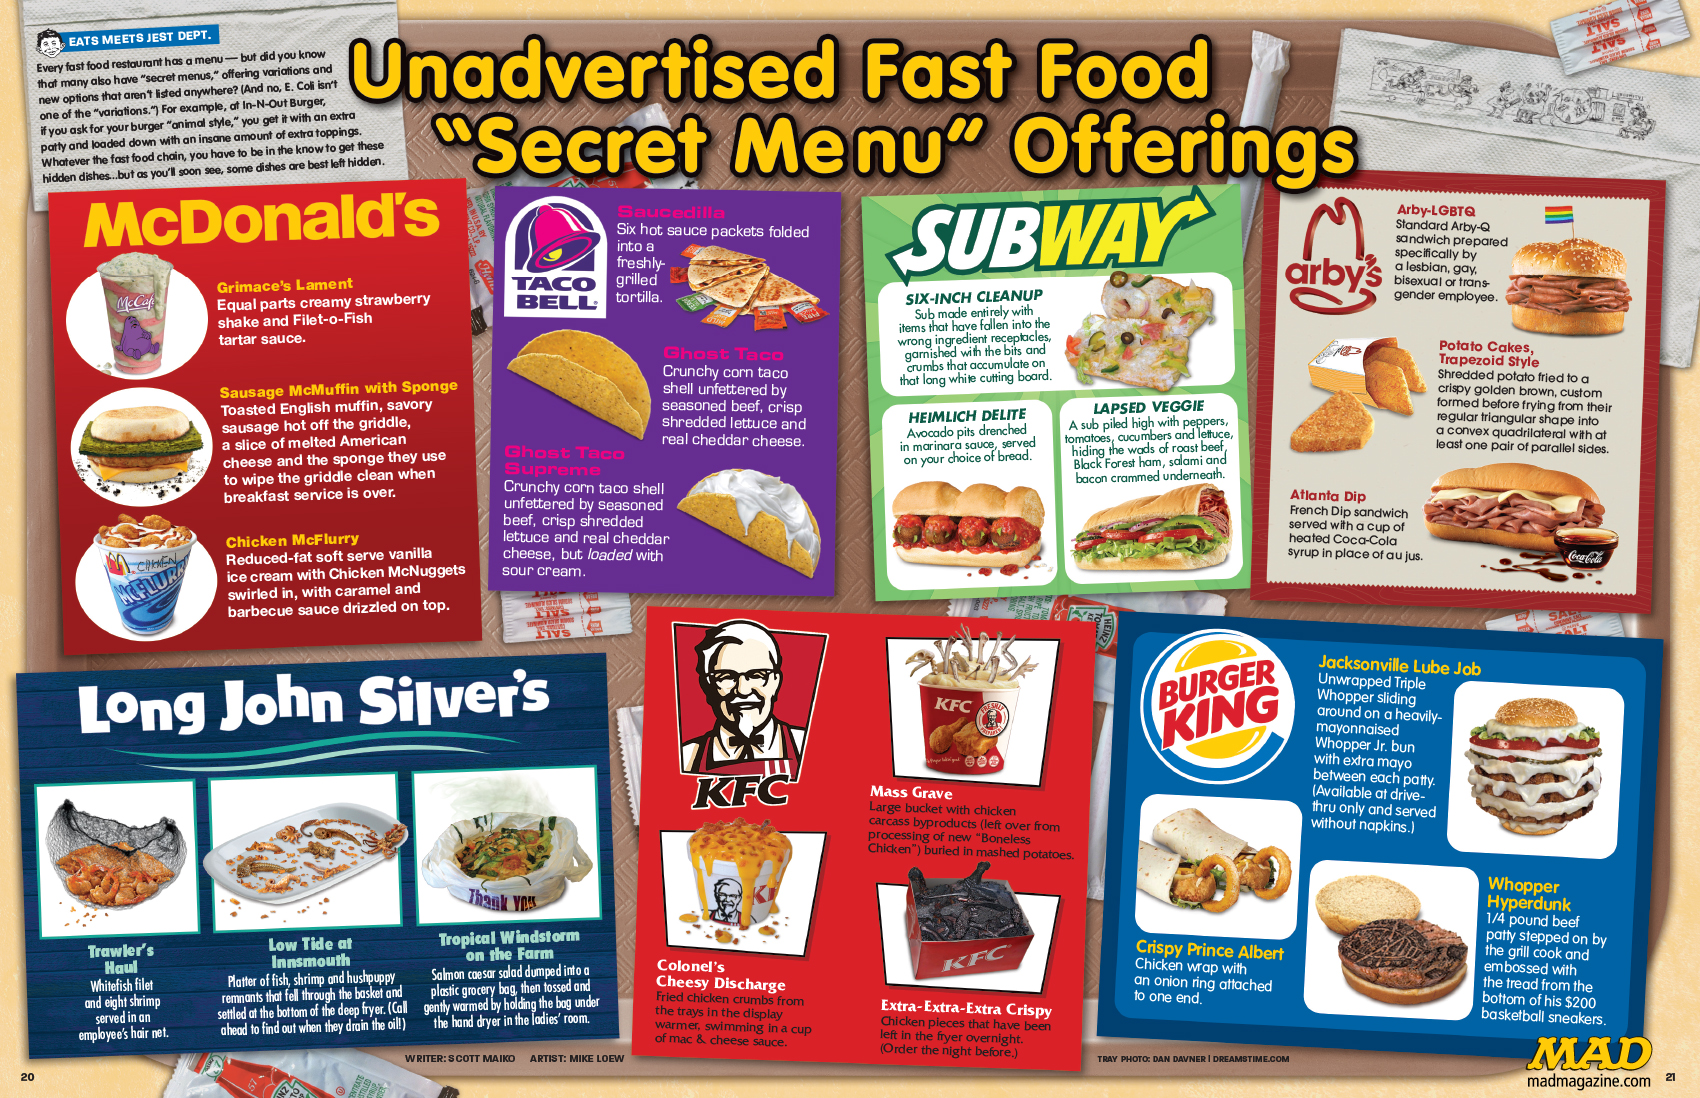 13 Fast Food Items You Can Get for a Dollar